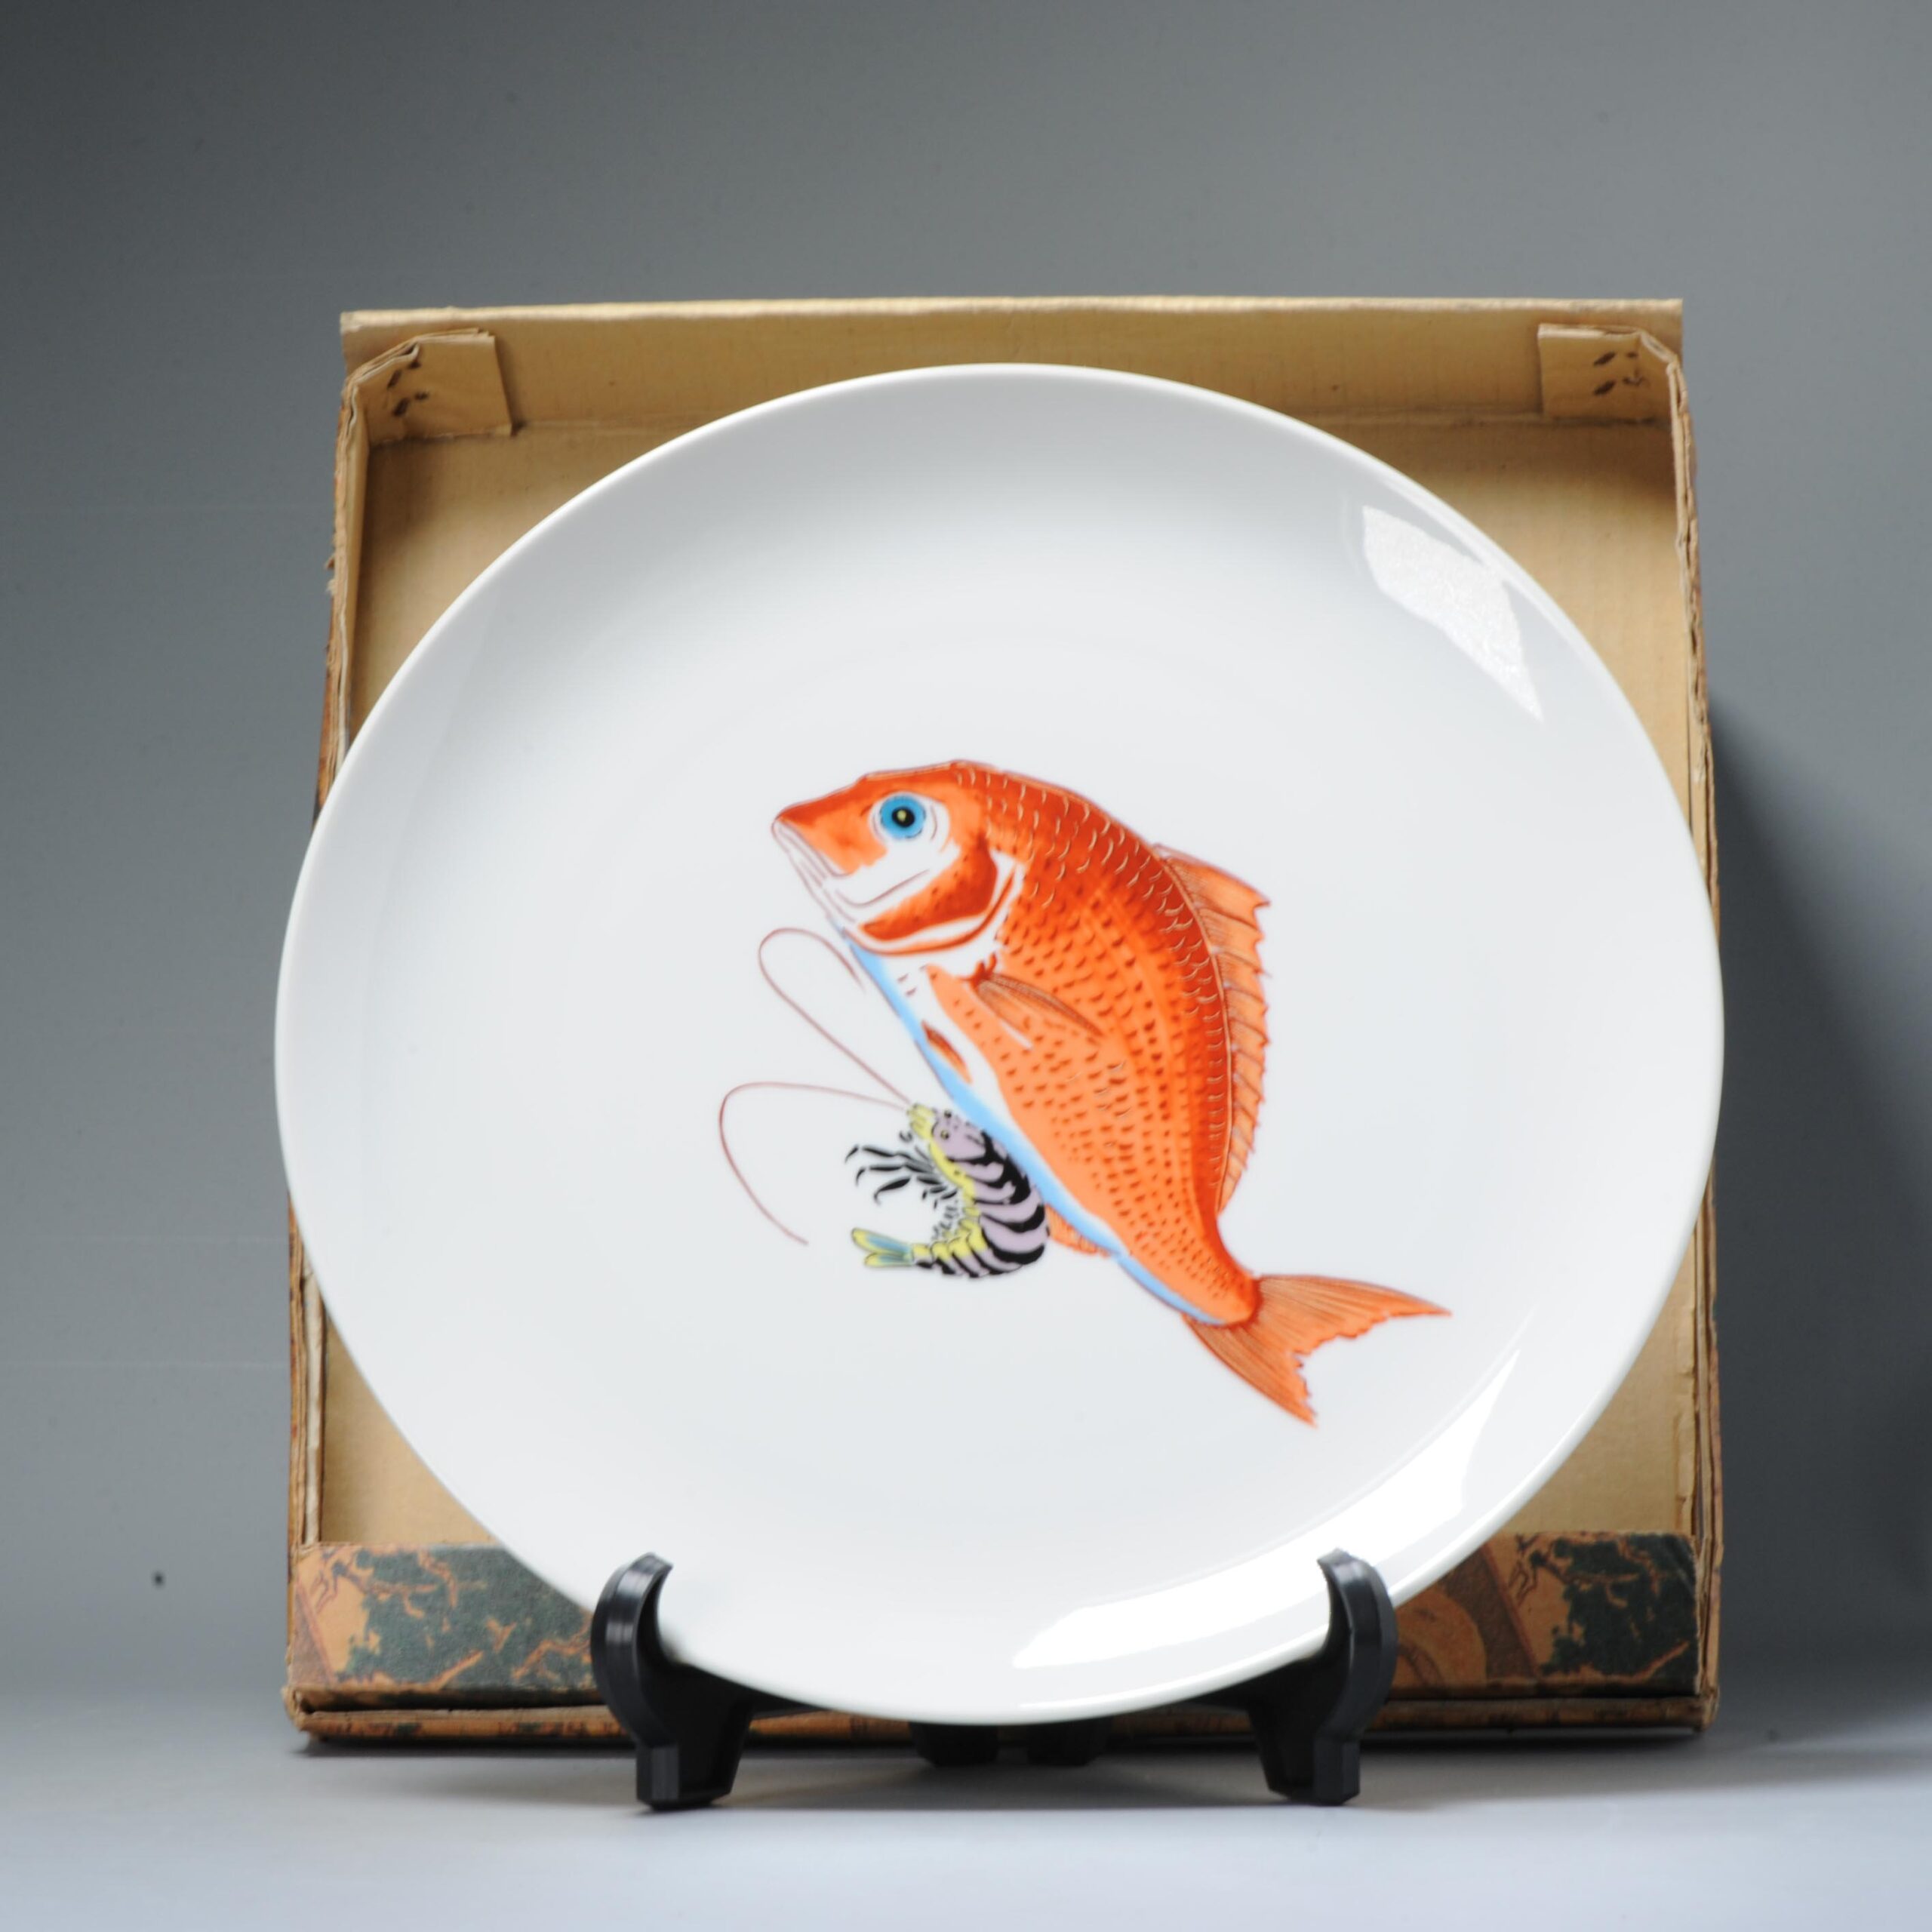 Art Japanese Porcelain plate with Fish and Shrimp. 20th C Showa Period